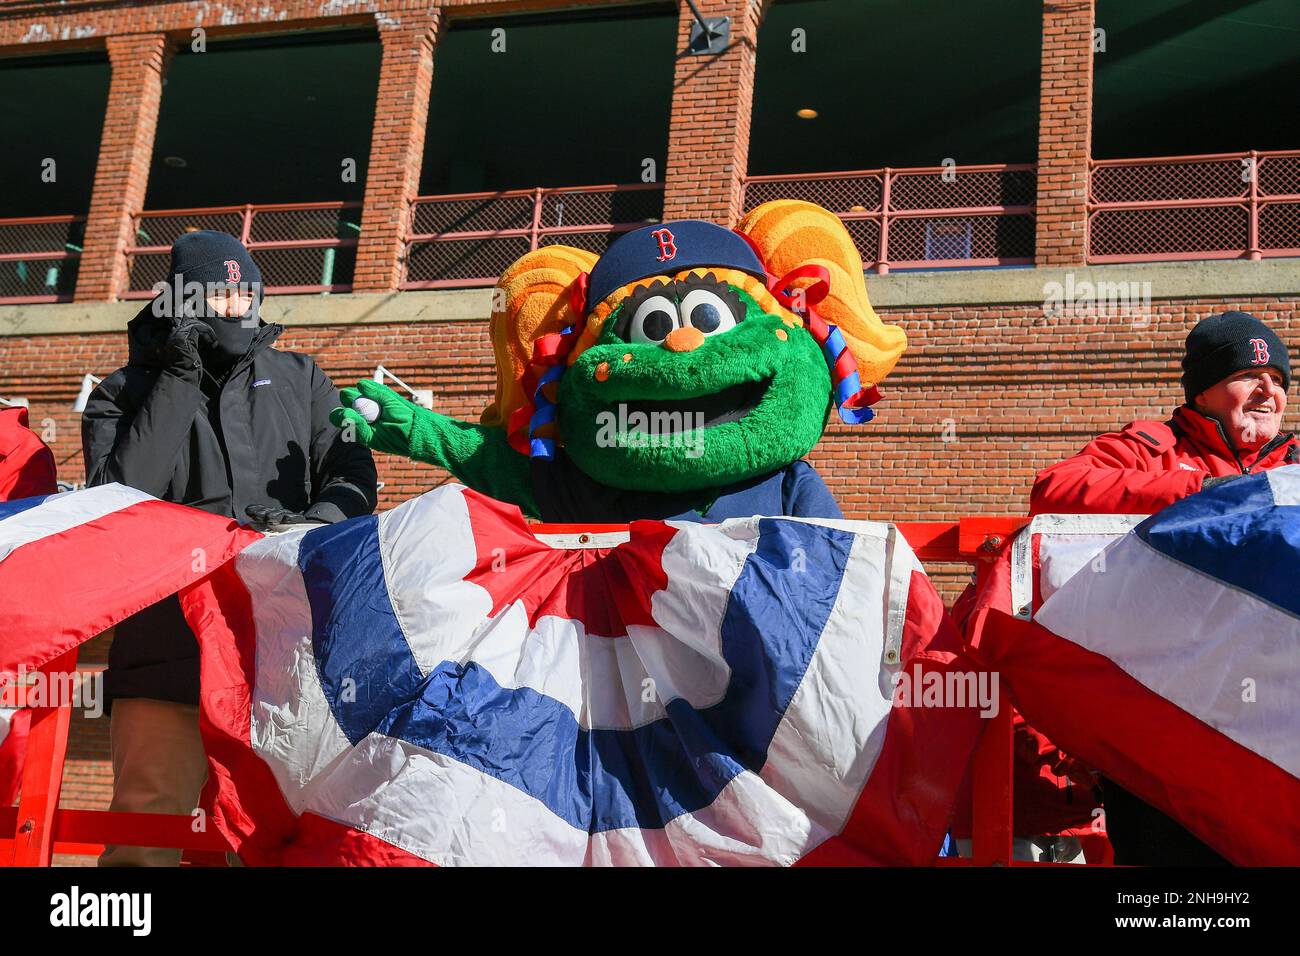 Boston Red Sox mascot Tessie the Green Monster before a spring training  baseball game against the Miami Marlins on March 5, 2023 at JetBlue Park in  Fort Myers, Florida. (Mike Janes/Four Seam